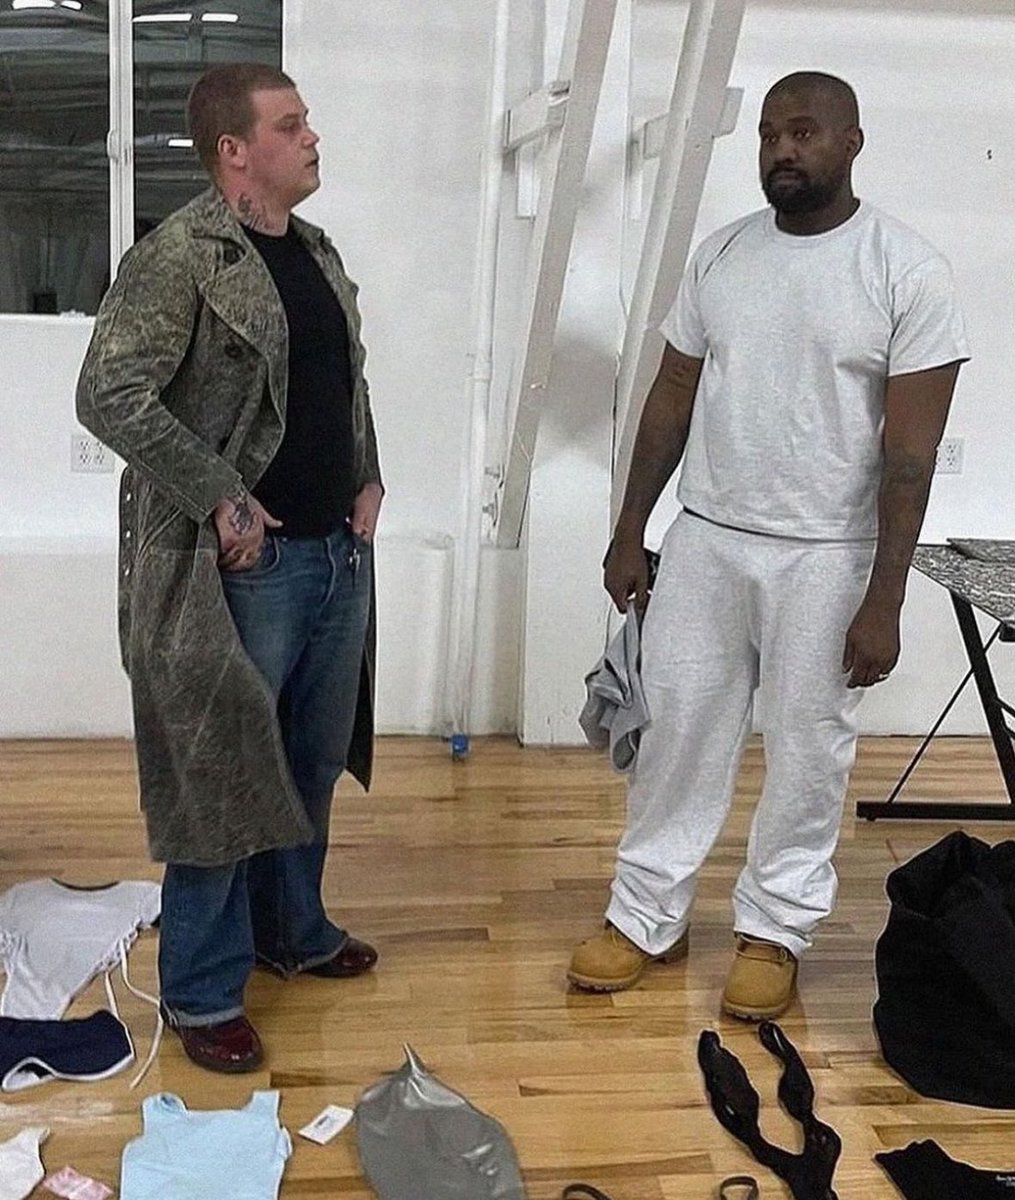 Ye and Yung Lean at the YZY HQ in LA.
New YZY SZN? 🐐